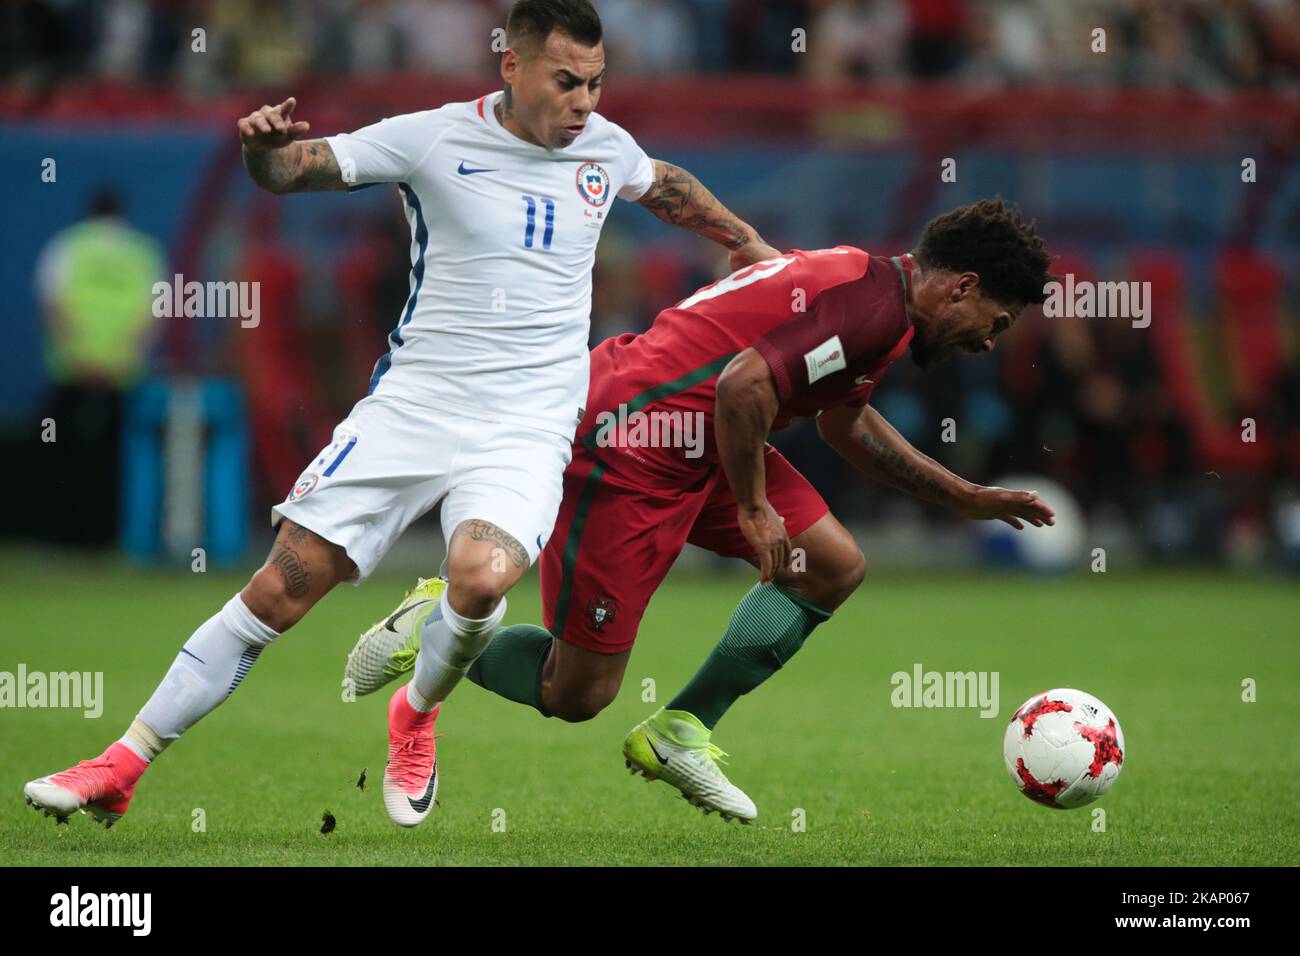 Eduardo Vargas (L) of the Chile national football team and Eliseu of the Portugal national football team vie for the ball during the 2017 FIFA Confederations Cup match, semi-finals between Portugal and Chile at Kazan Arena on June 28, 2017 in Kazan, Russia. (Photo by Igor Russak/NurPhoto) *** Please Use Credit from Credit Field *** Stock Photo